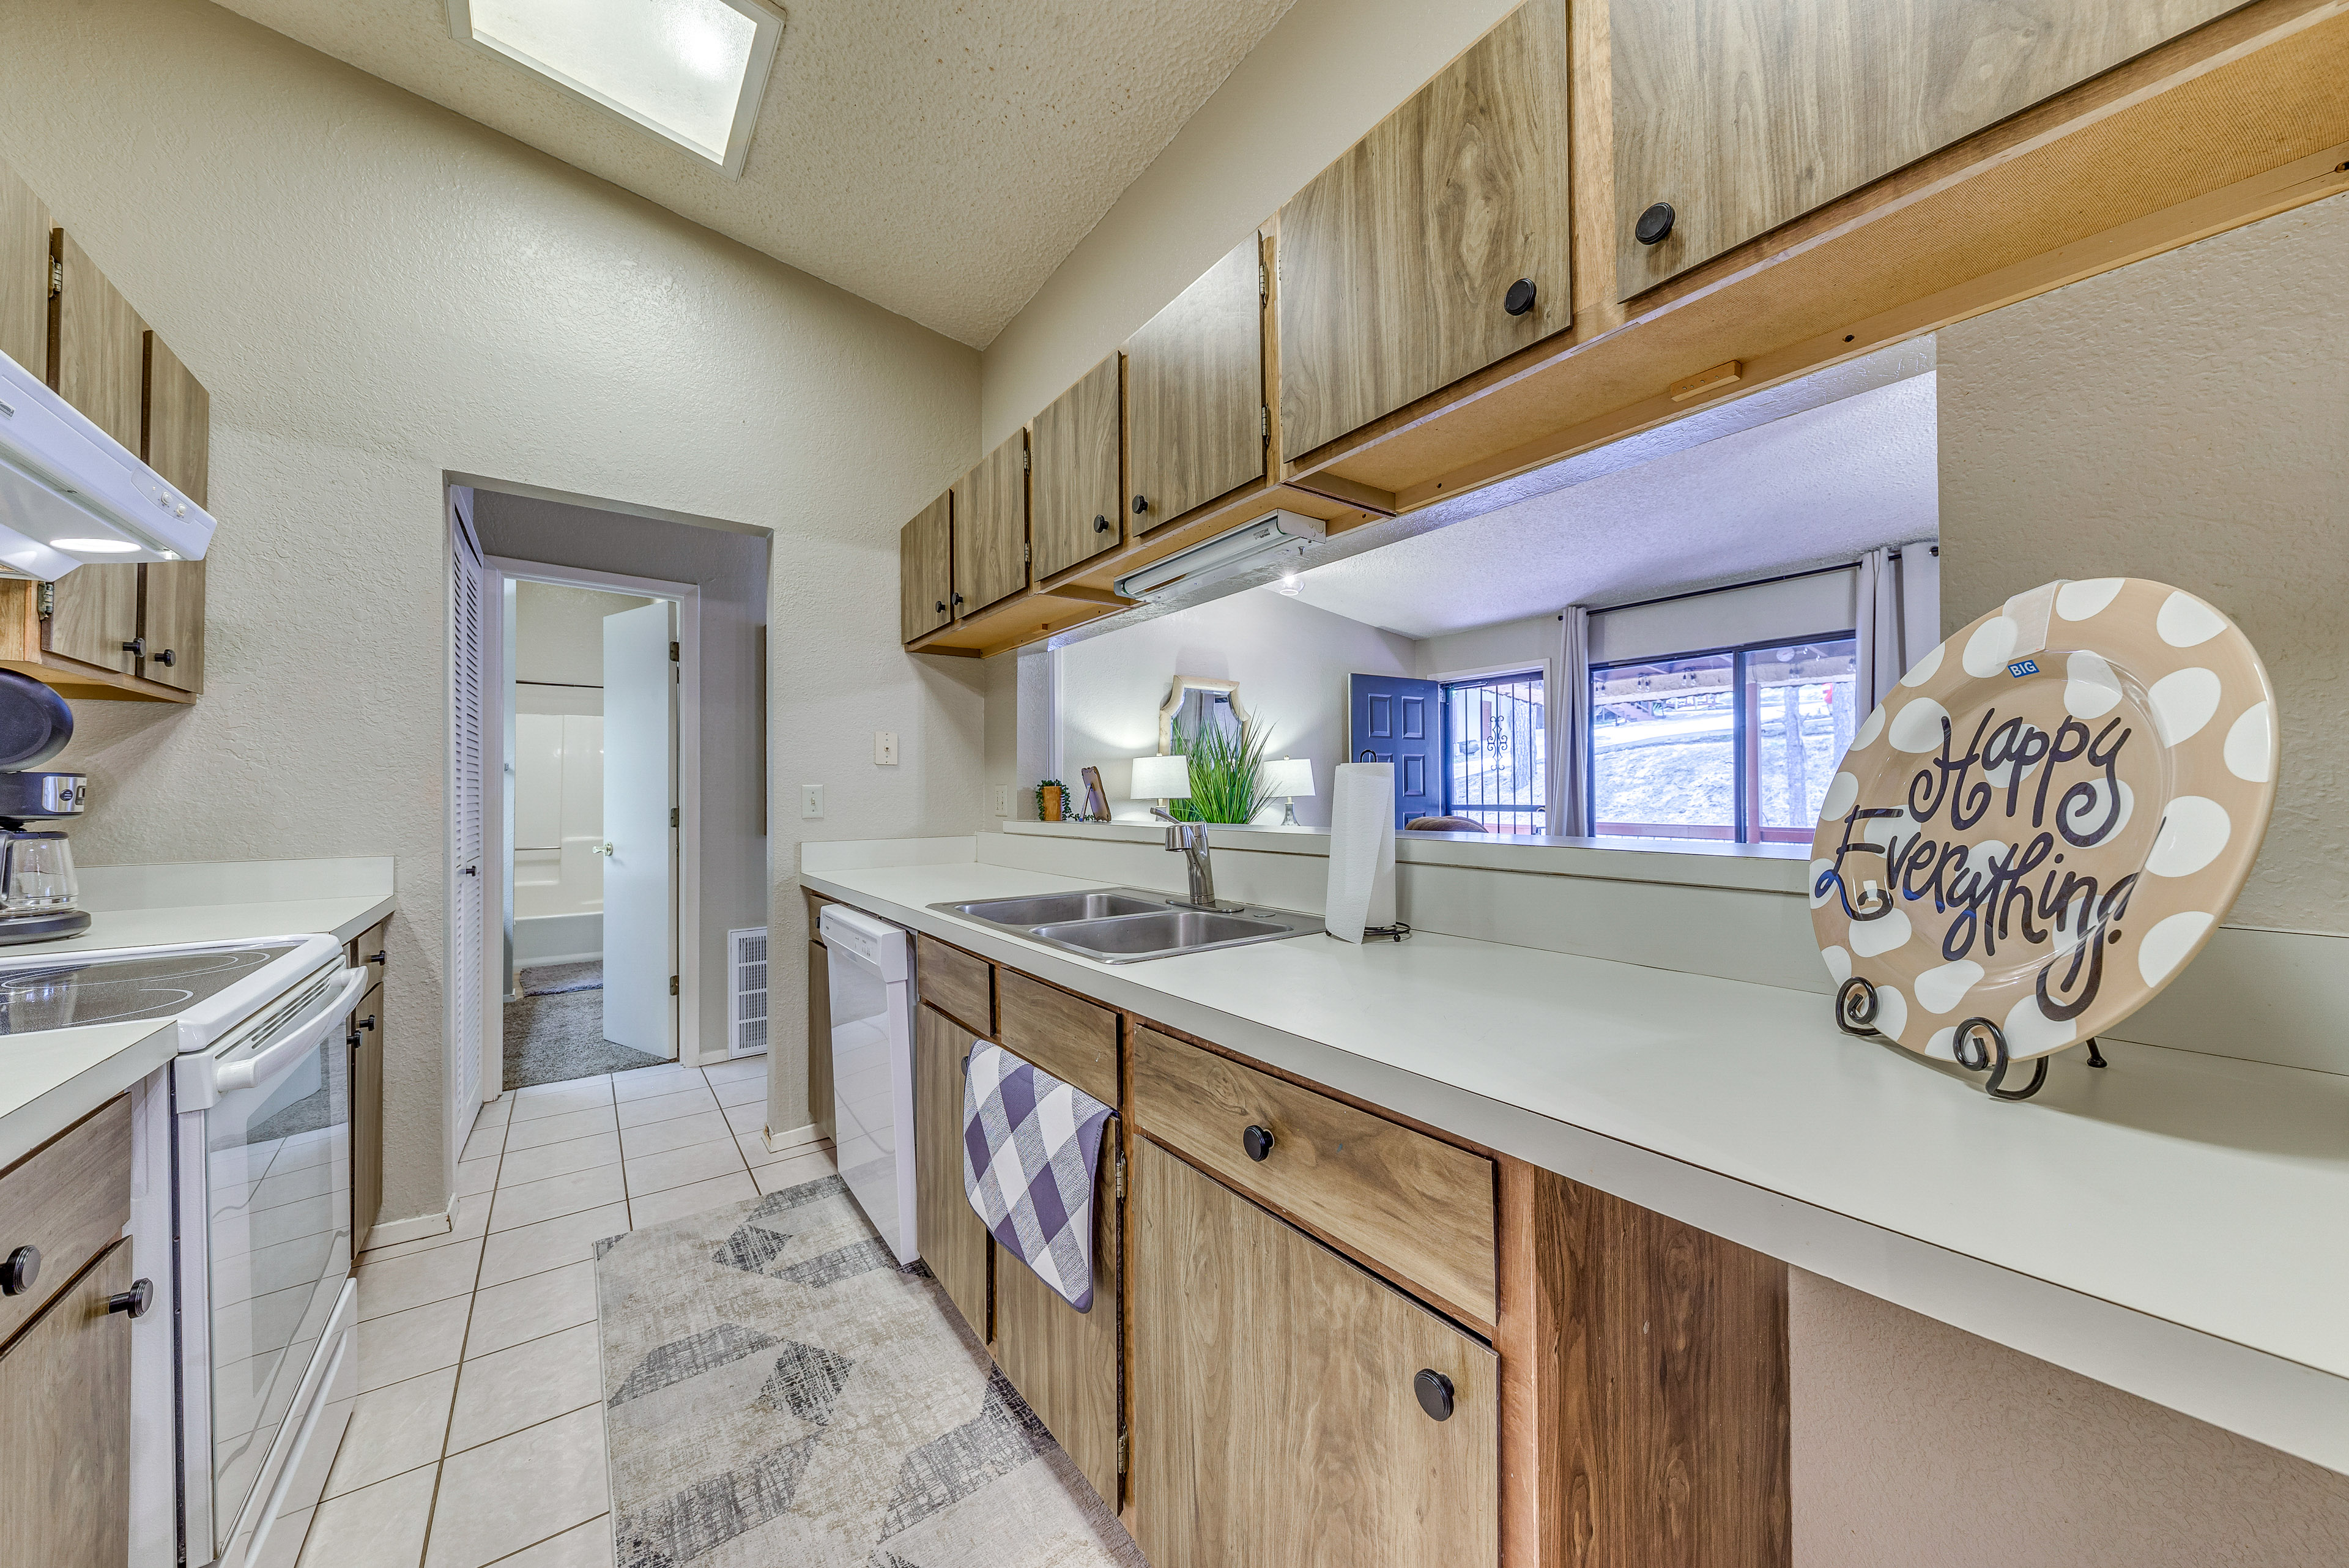 Alto Oasis: Community Pool, Fireplace & Grill!